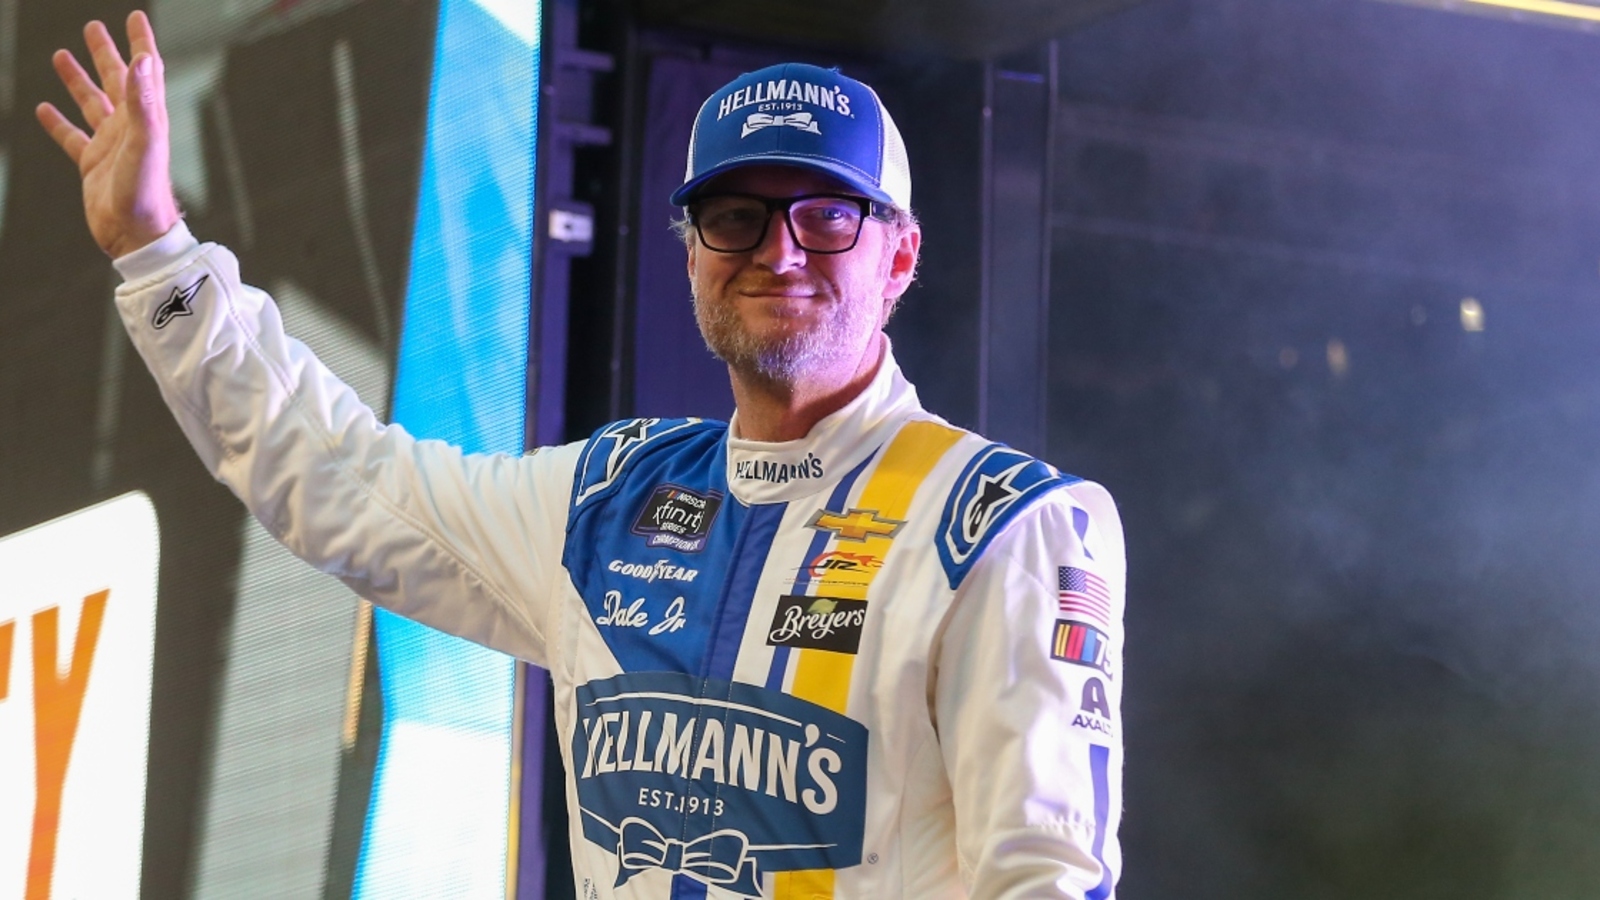 Dale Earnhardt Jr. will be special guest on ‘Marty and McGee’ show at Daytona